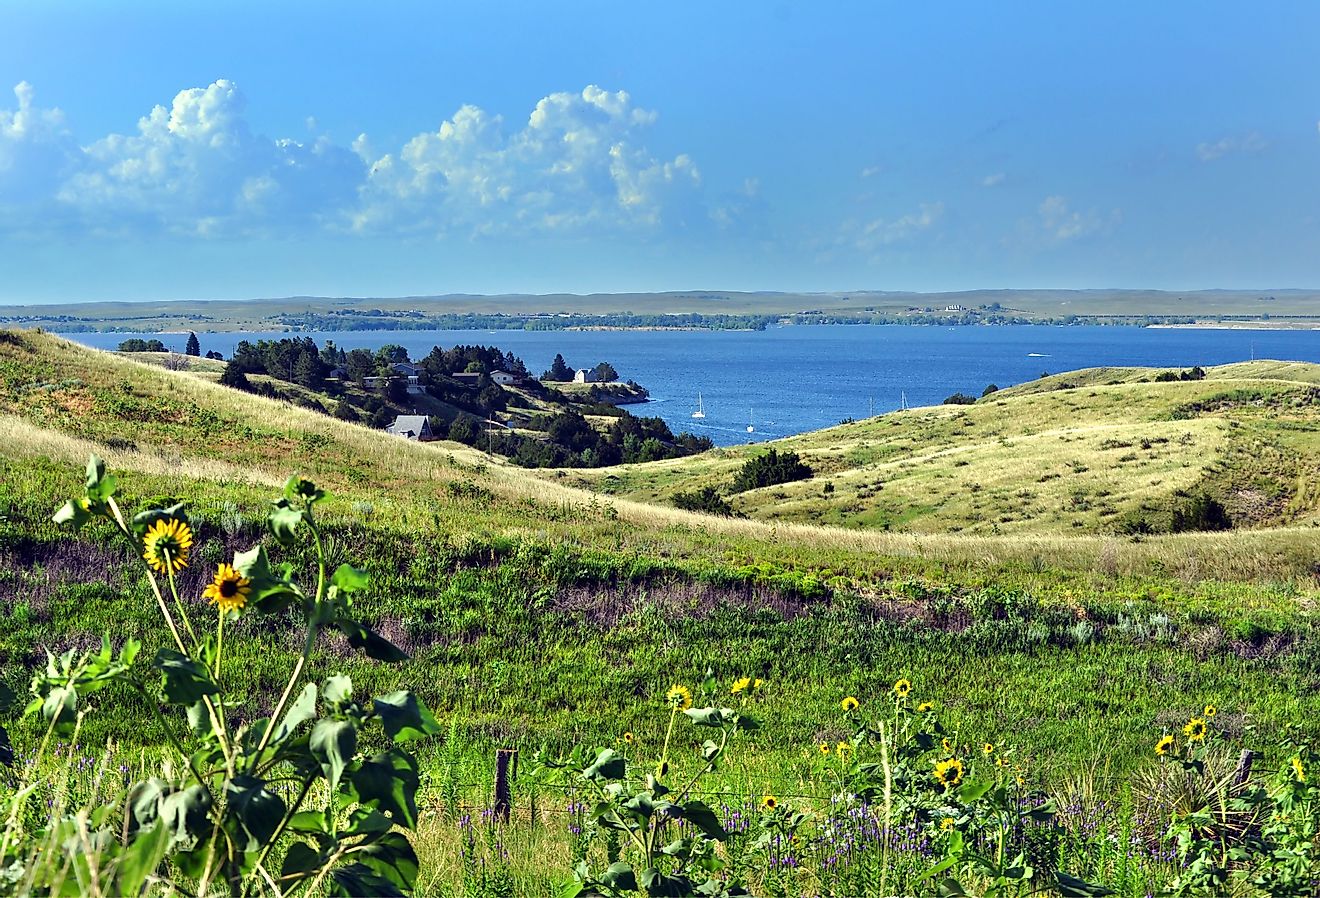 Rolling Nebraska grassland slopes down to the blue small bay with tiny white sail boats on Lake McConaughy.